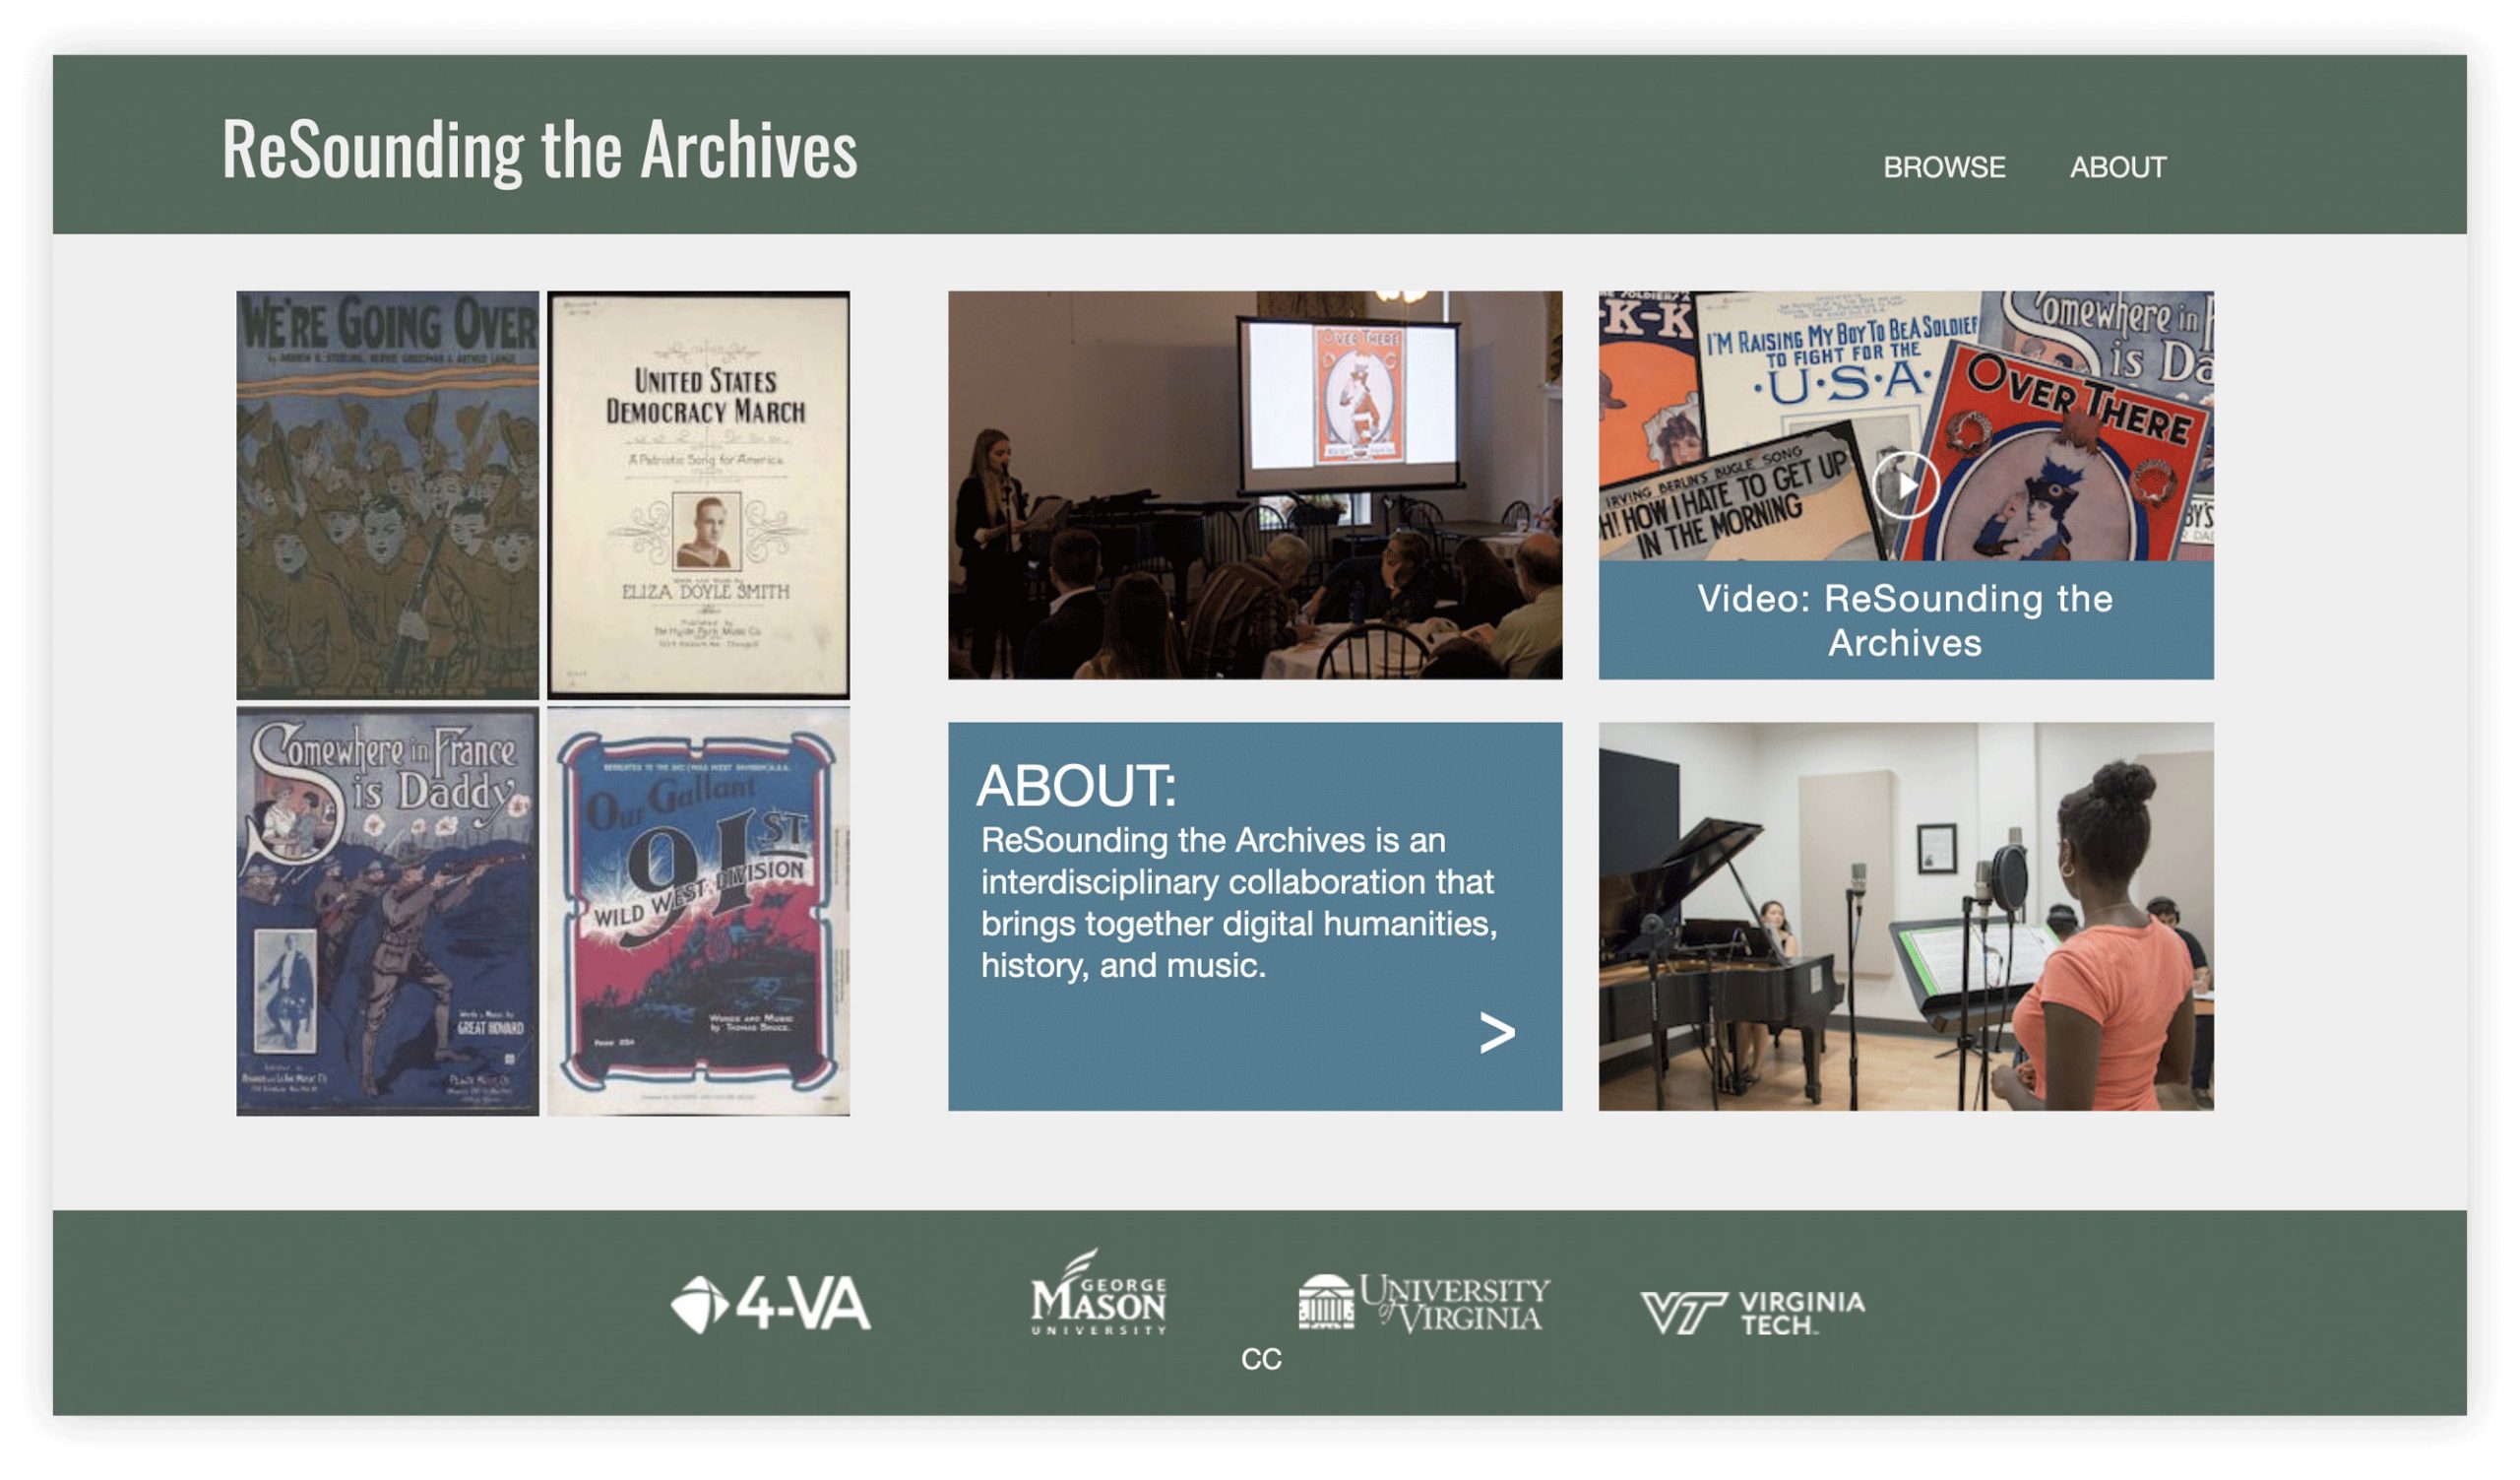 Screengrab of the ReSounding the Archives home page.